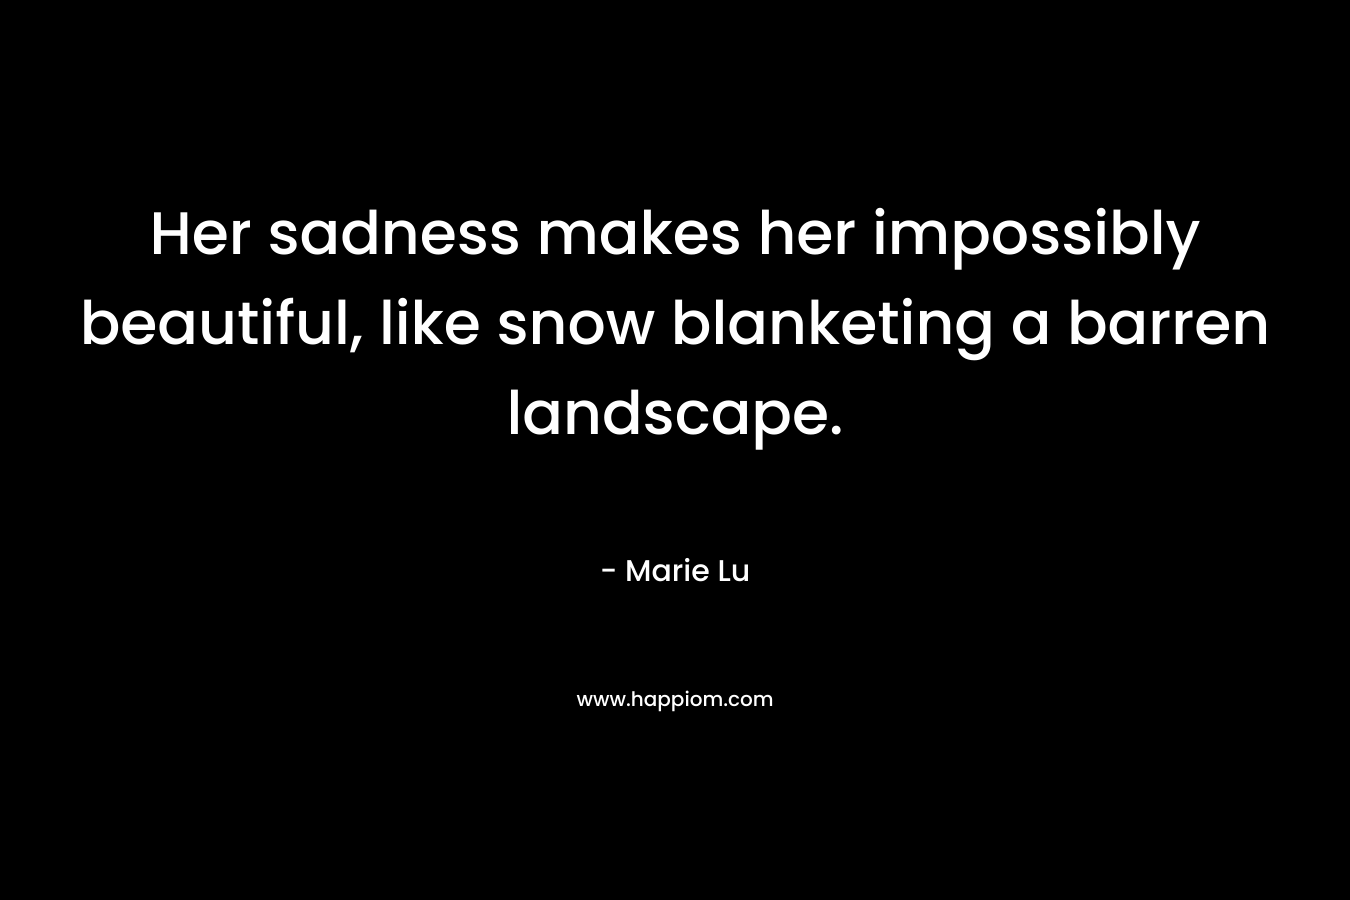 Her sadness makes her impossibly beautiful, like snow blanketing a barren landscape. – Marie Lu